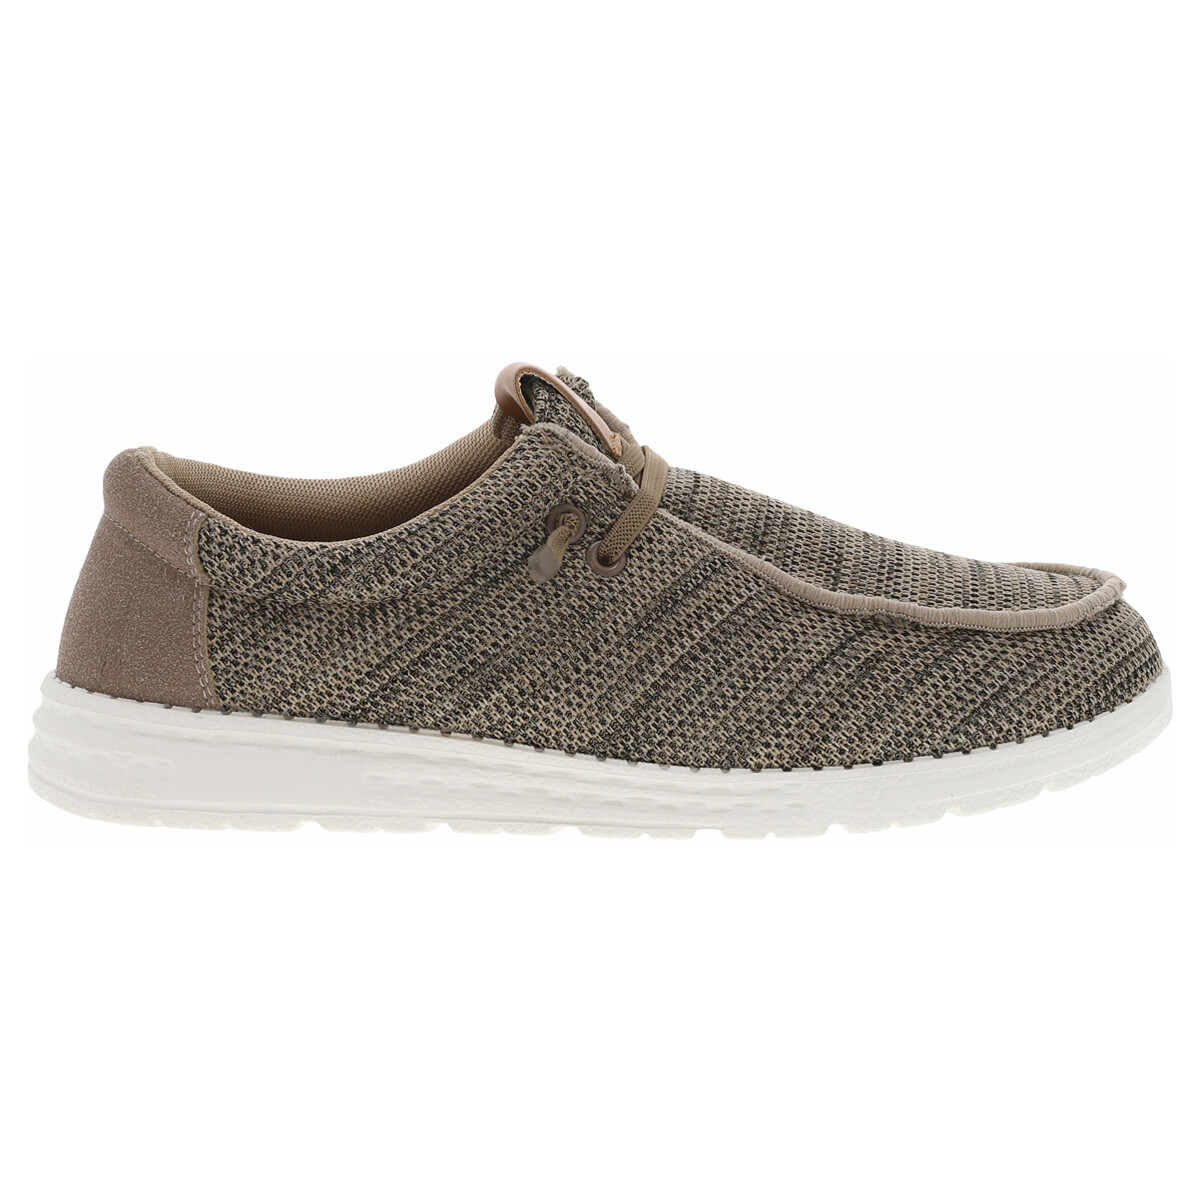 Chaussures Homme Baskets mode Refresh Baskets basses Gris